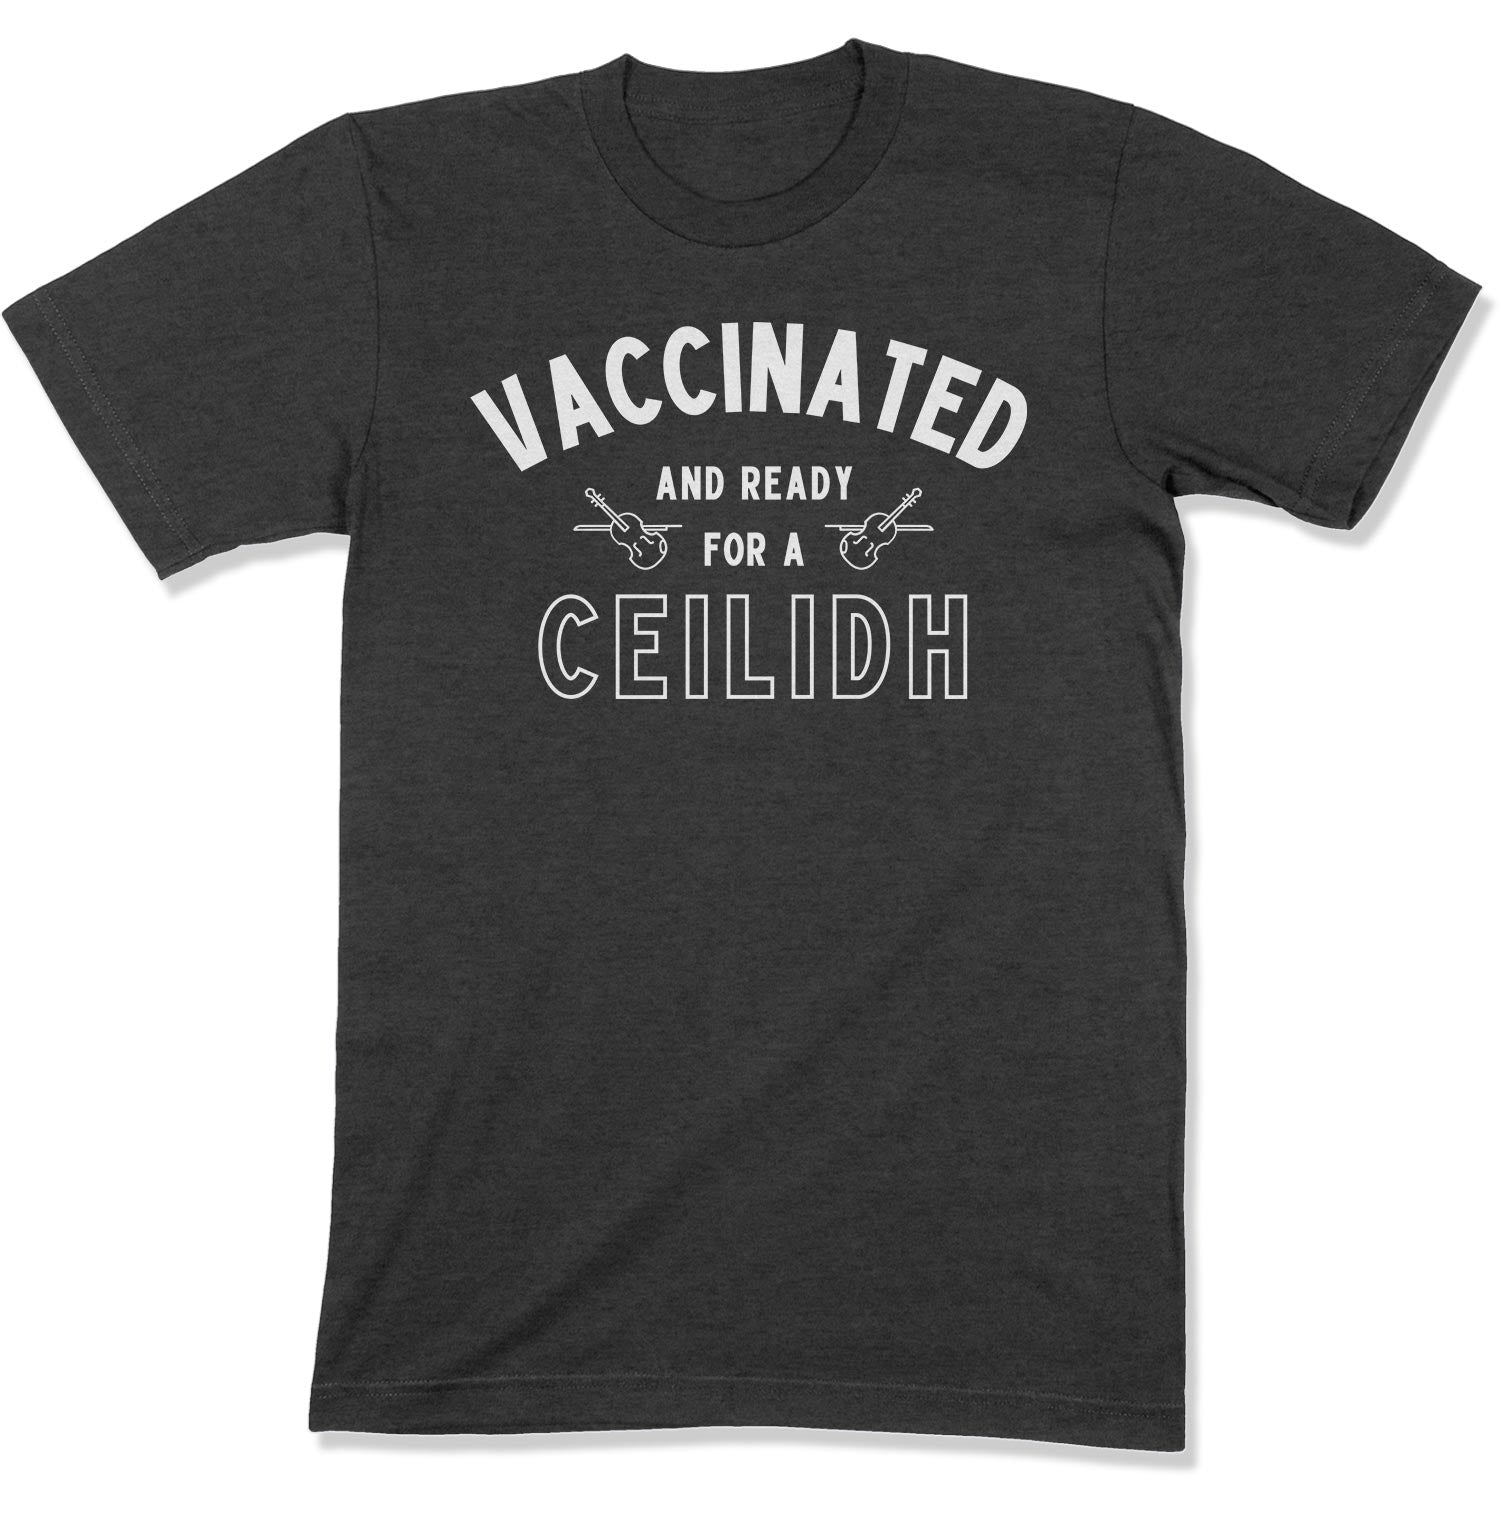 Vaccinated and Ready for a Ceilidh Unisex T-Shirt-East Coast AF Apparel